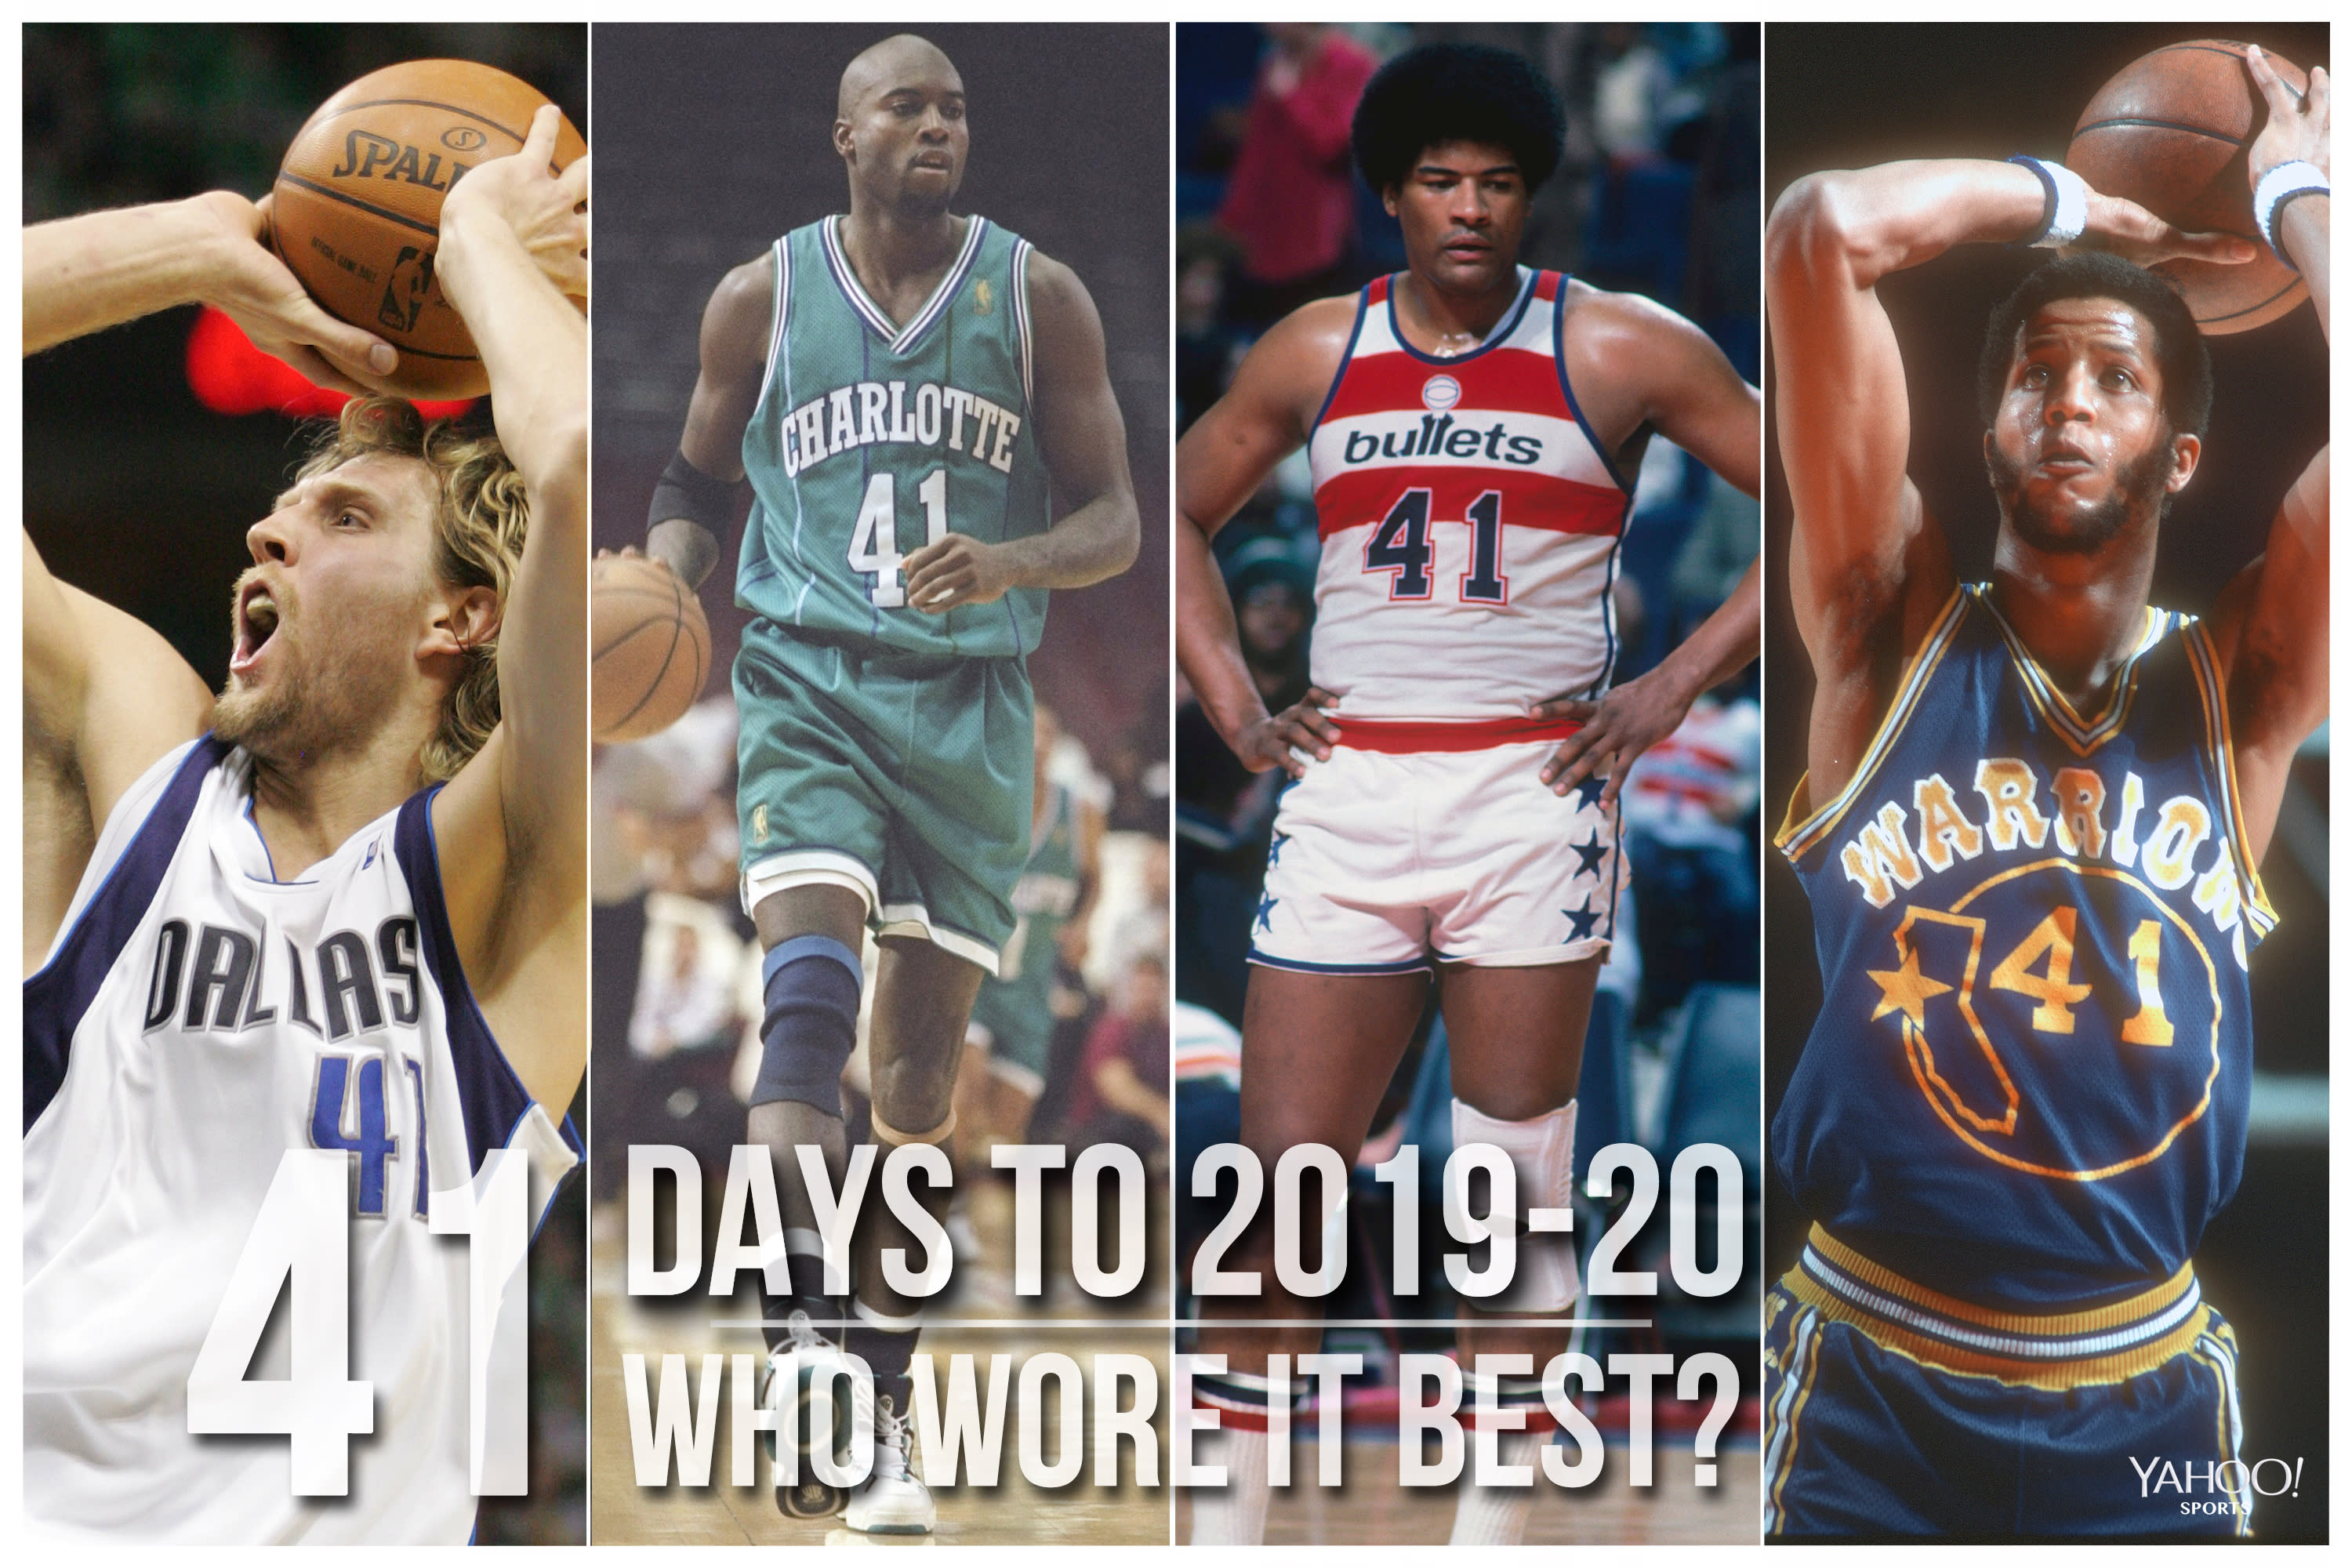 NBA Countdown: Who wore No. 41 best?